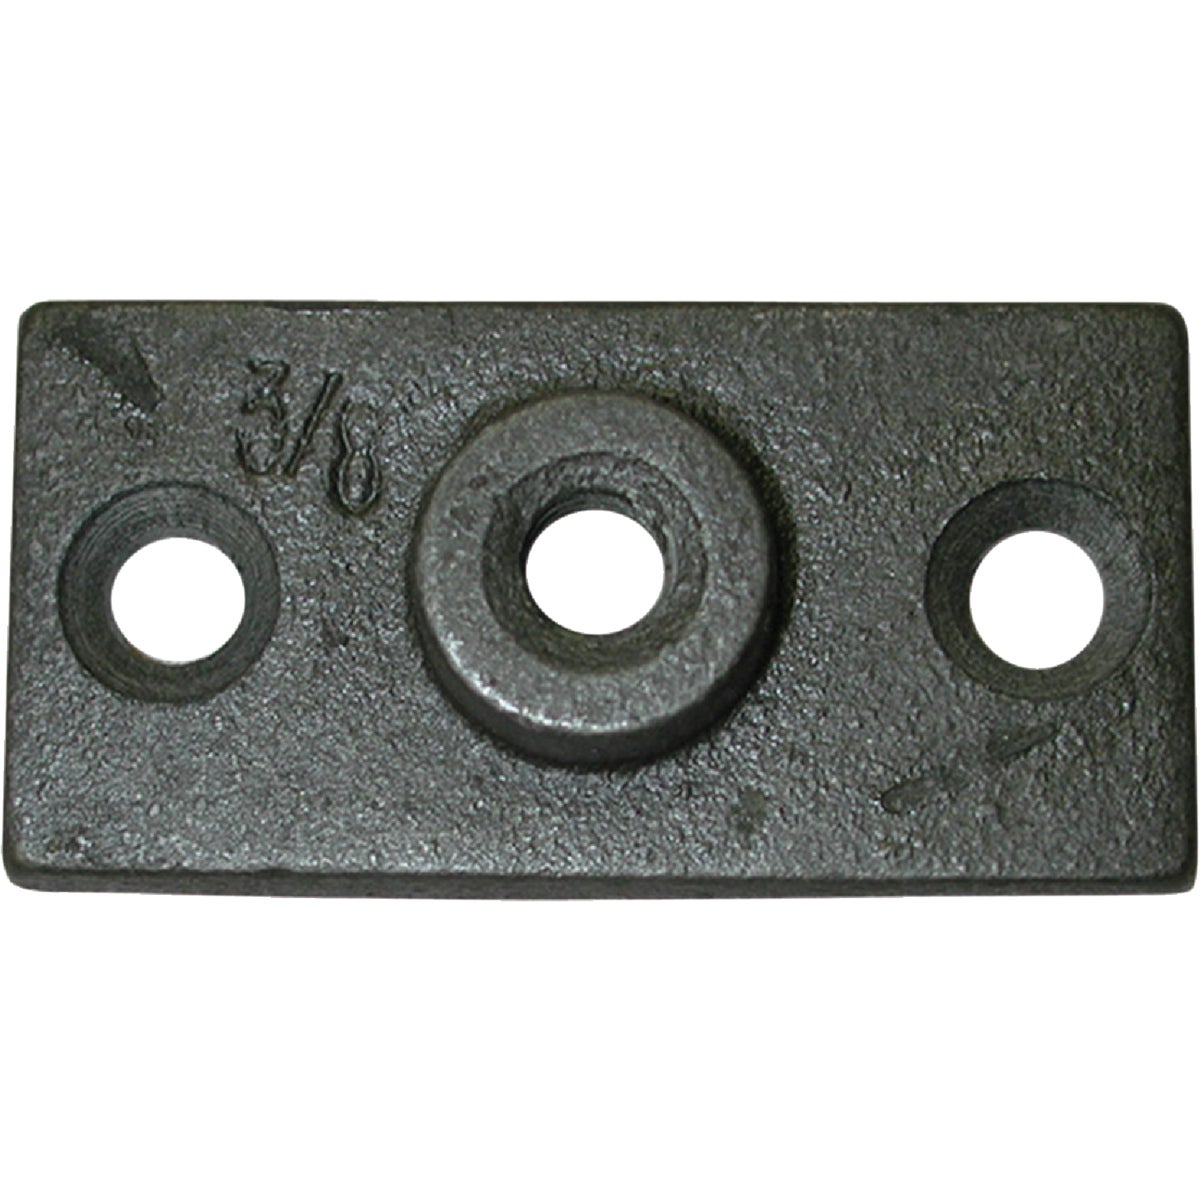 Item 466329, Used to connect split ring hangers. Use with 3/8 In. thread rod.